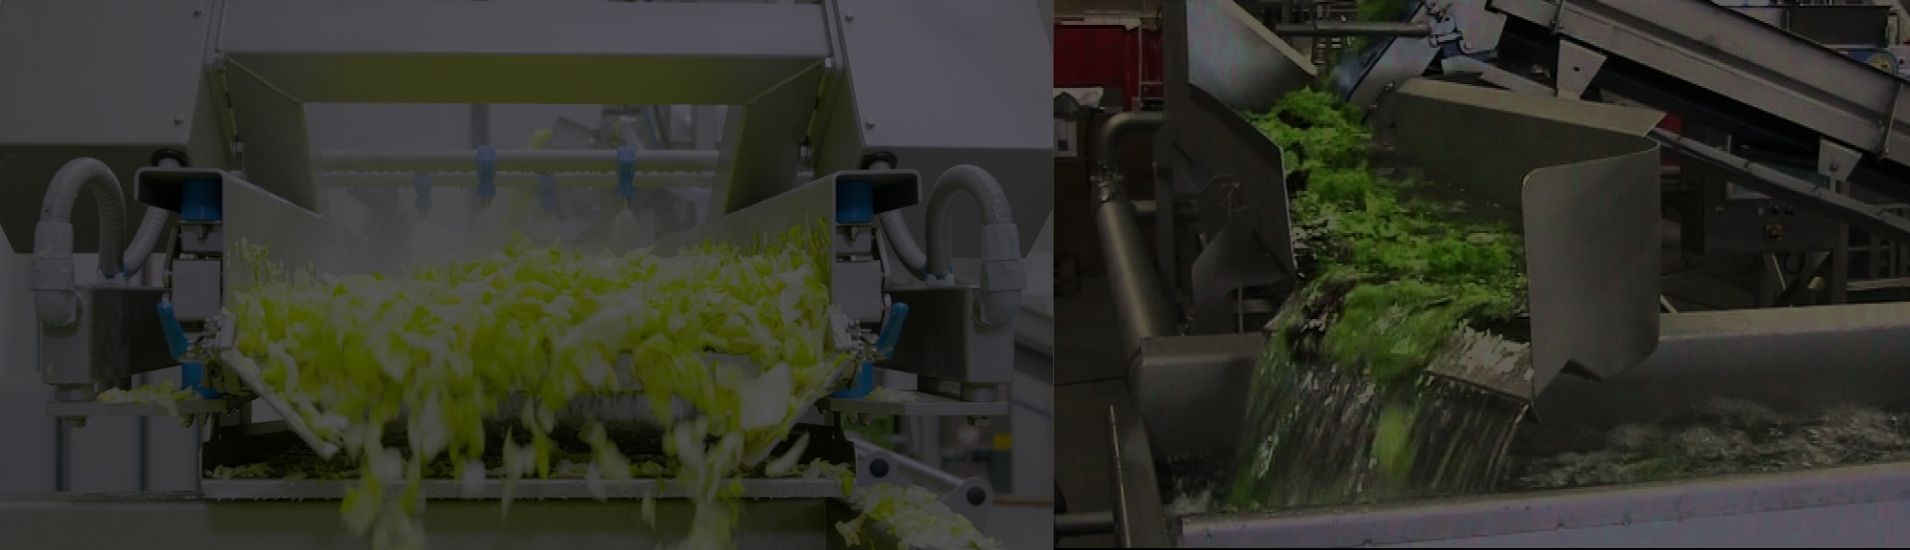 One Stop Salad Packaging Machine Solution for Your Business